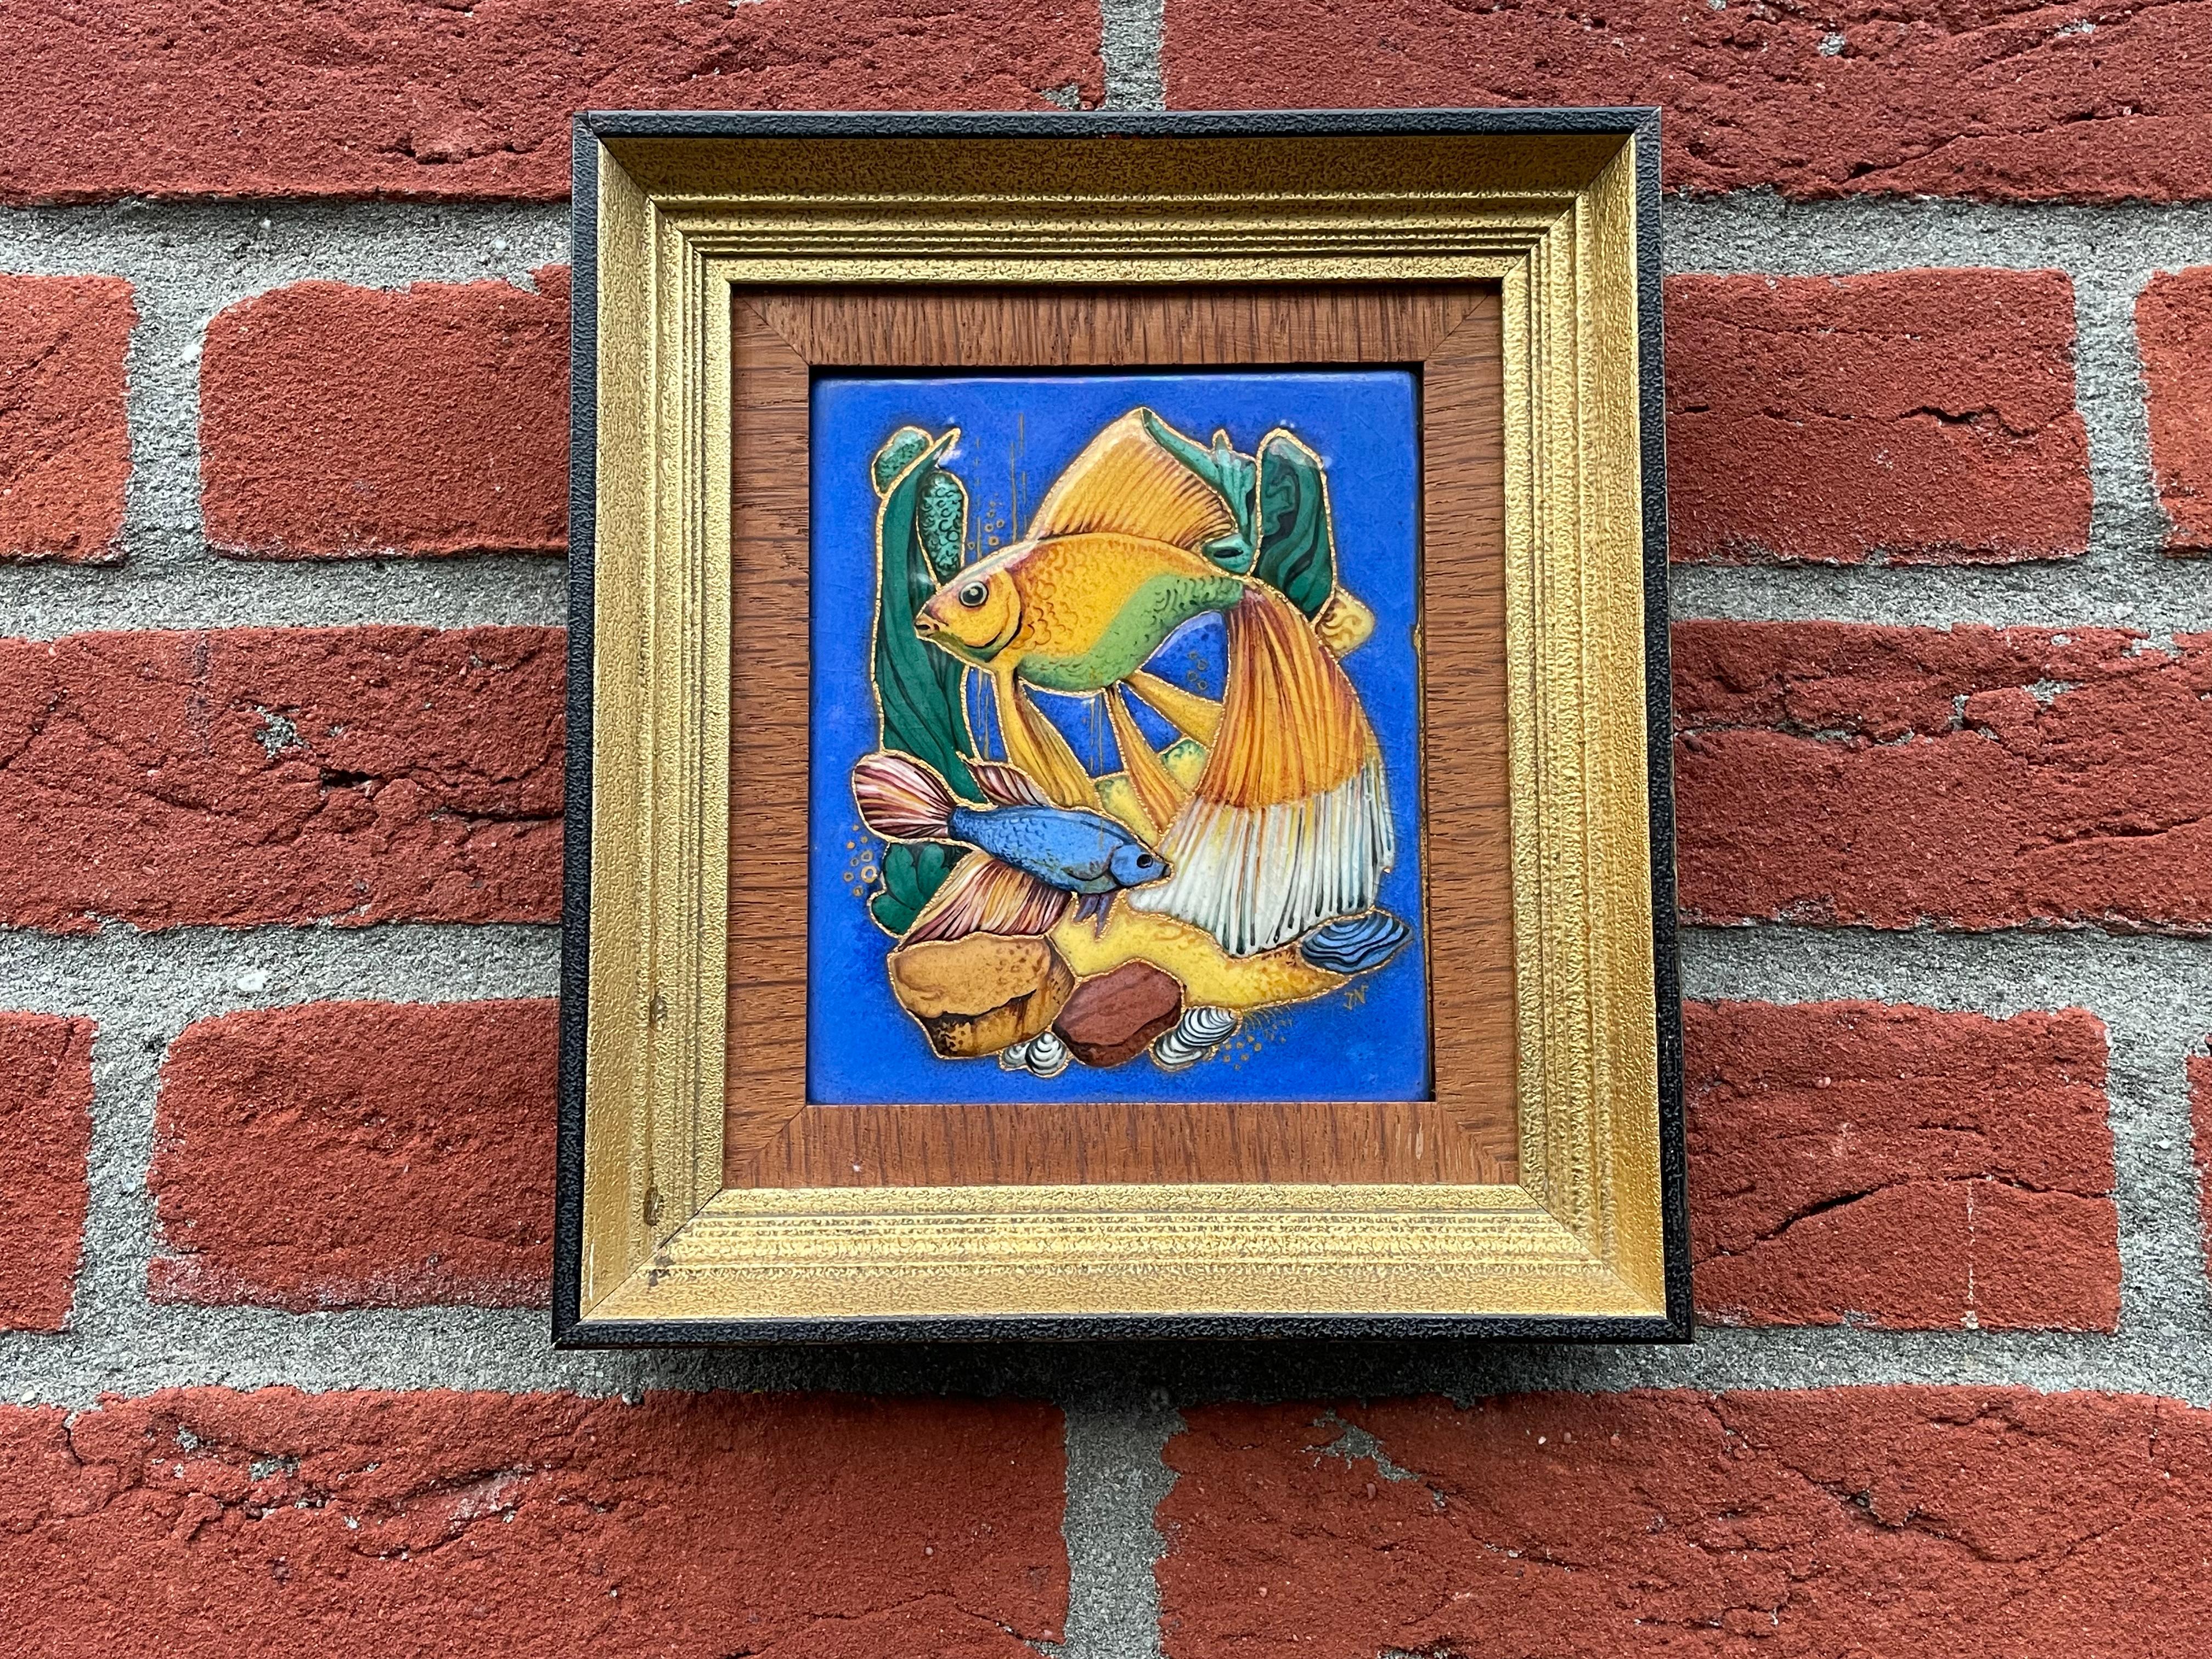 Amazing workmanship enamel paintings in original frames. 

This unique and stunning pair of Midcentury Modern enamel paintings, in our view, is fit for a fine art museum, because this is the type of refined artwork that you don't find aymore in this